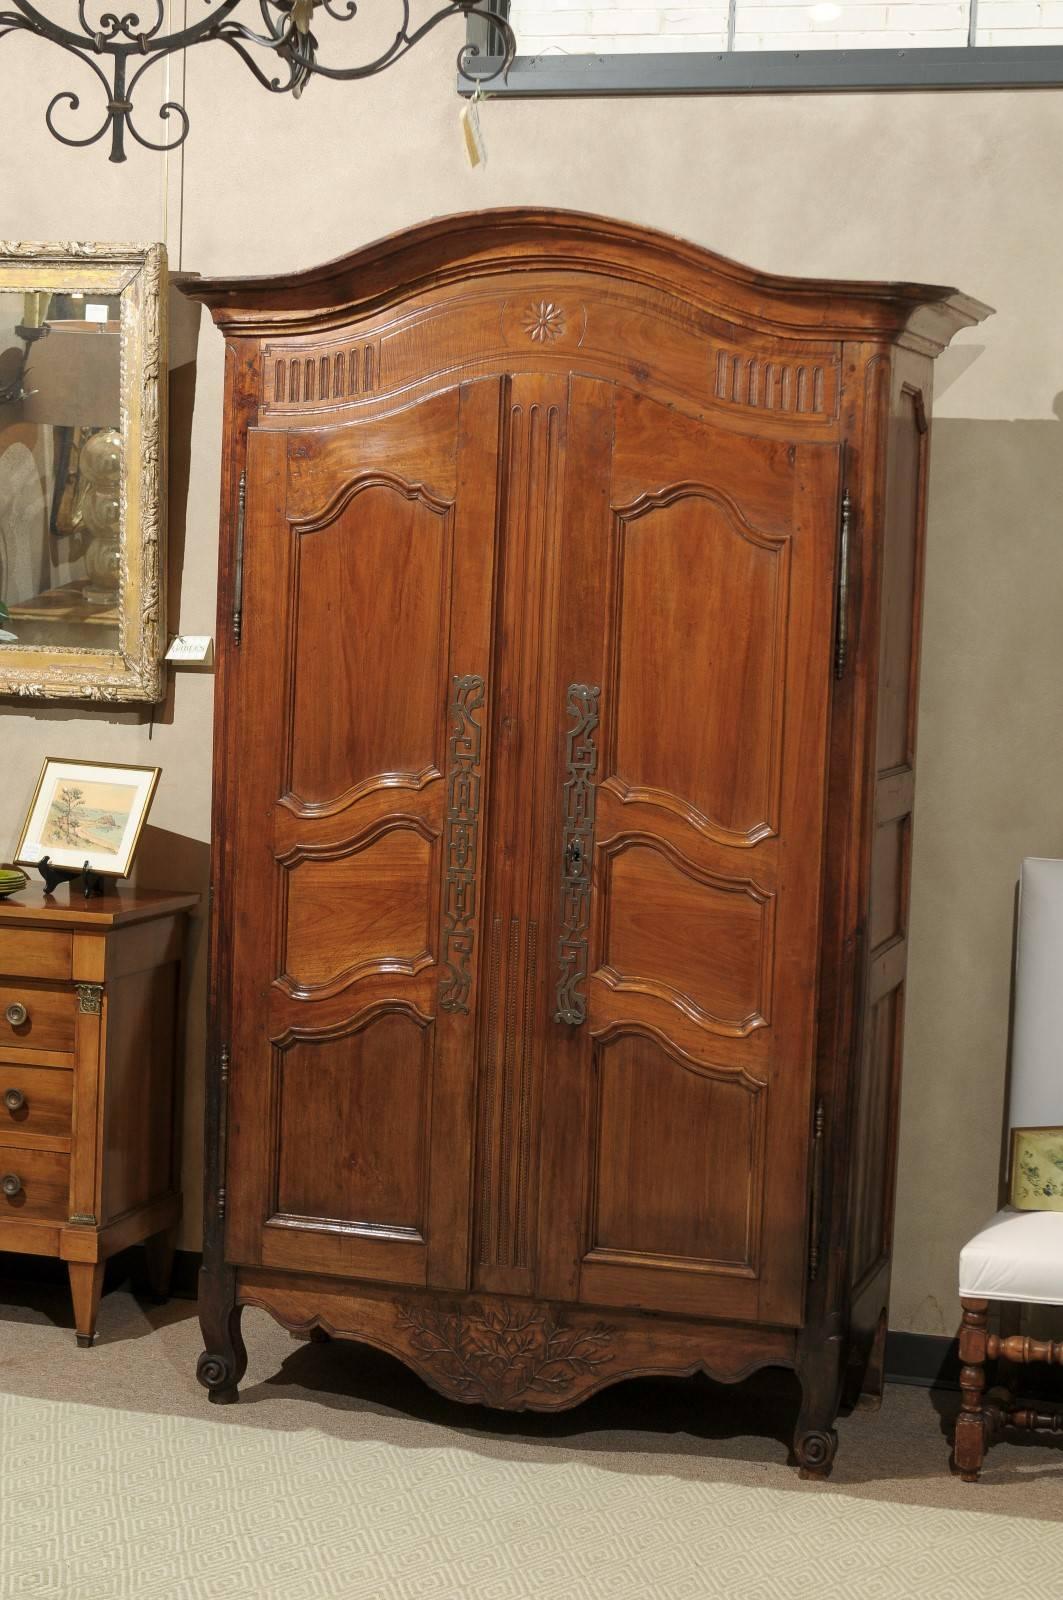 Louis XVth Style  Walnut Armoire with Domed Top, circa 1840
With three shelves, this little armoire provides plenty of storage or if it needs to house a television, one shelf can be removed easily. It has just enough carving with the olive branch on